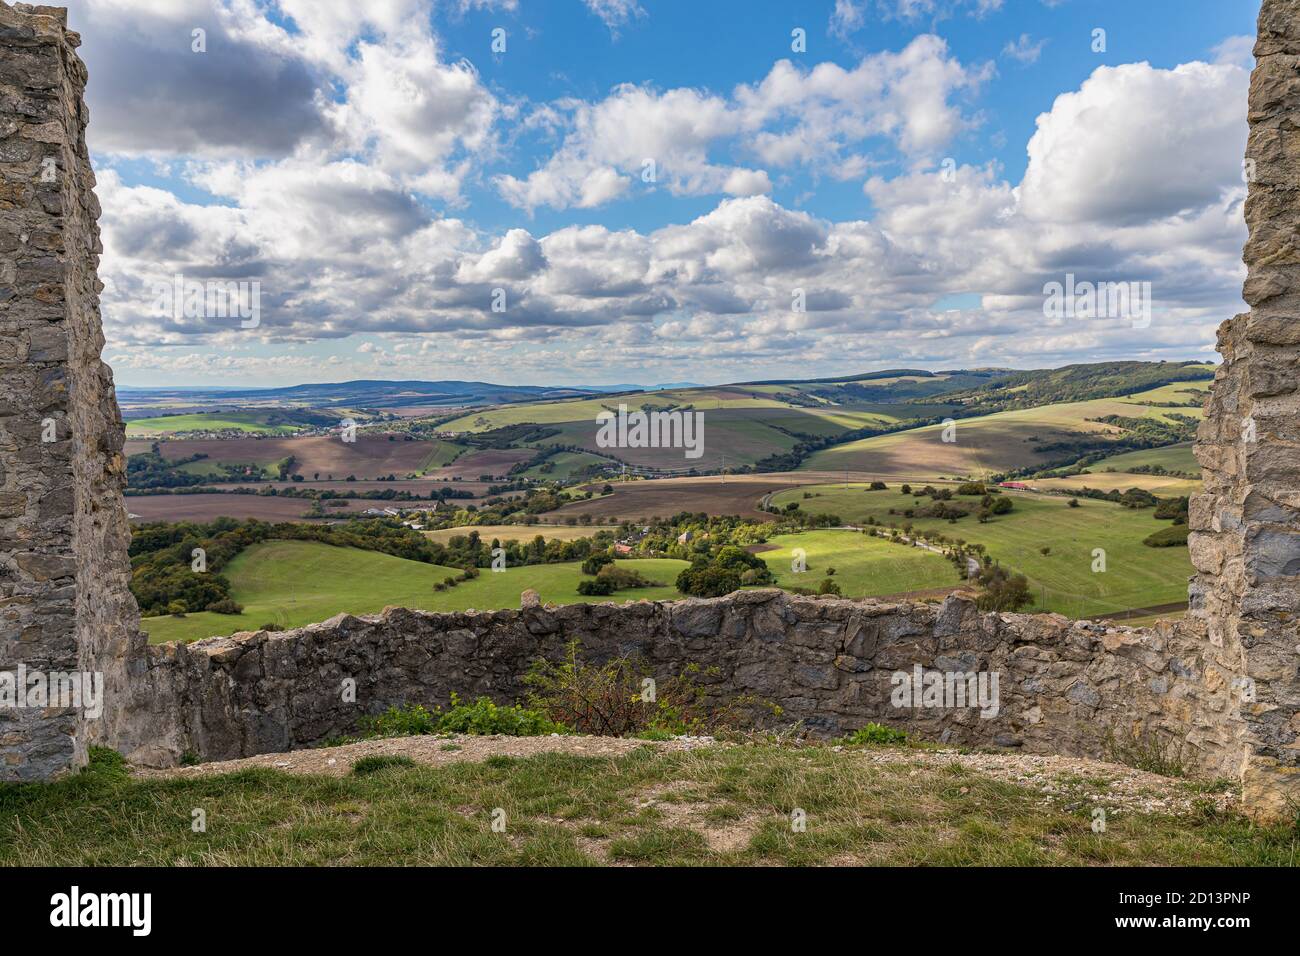 The ruins of the ancient castle Branc - Europe, Slovakia Stock Photo